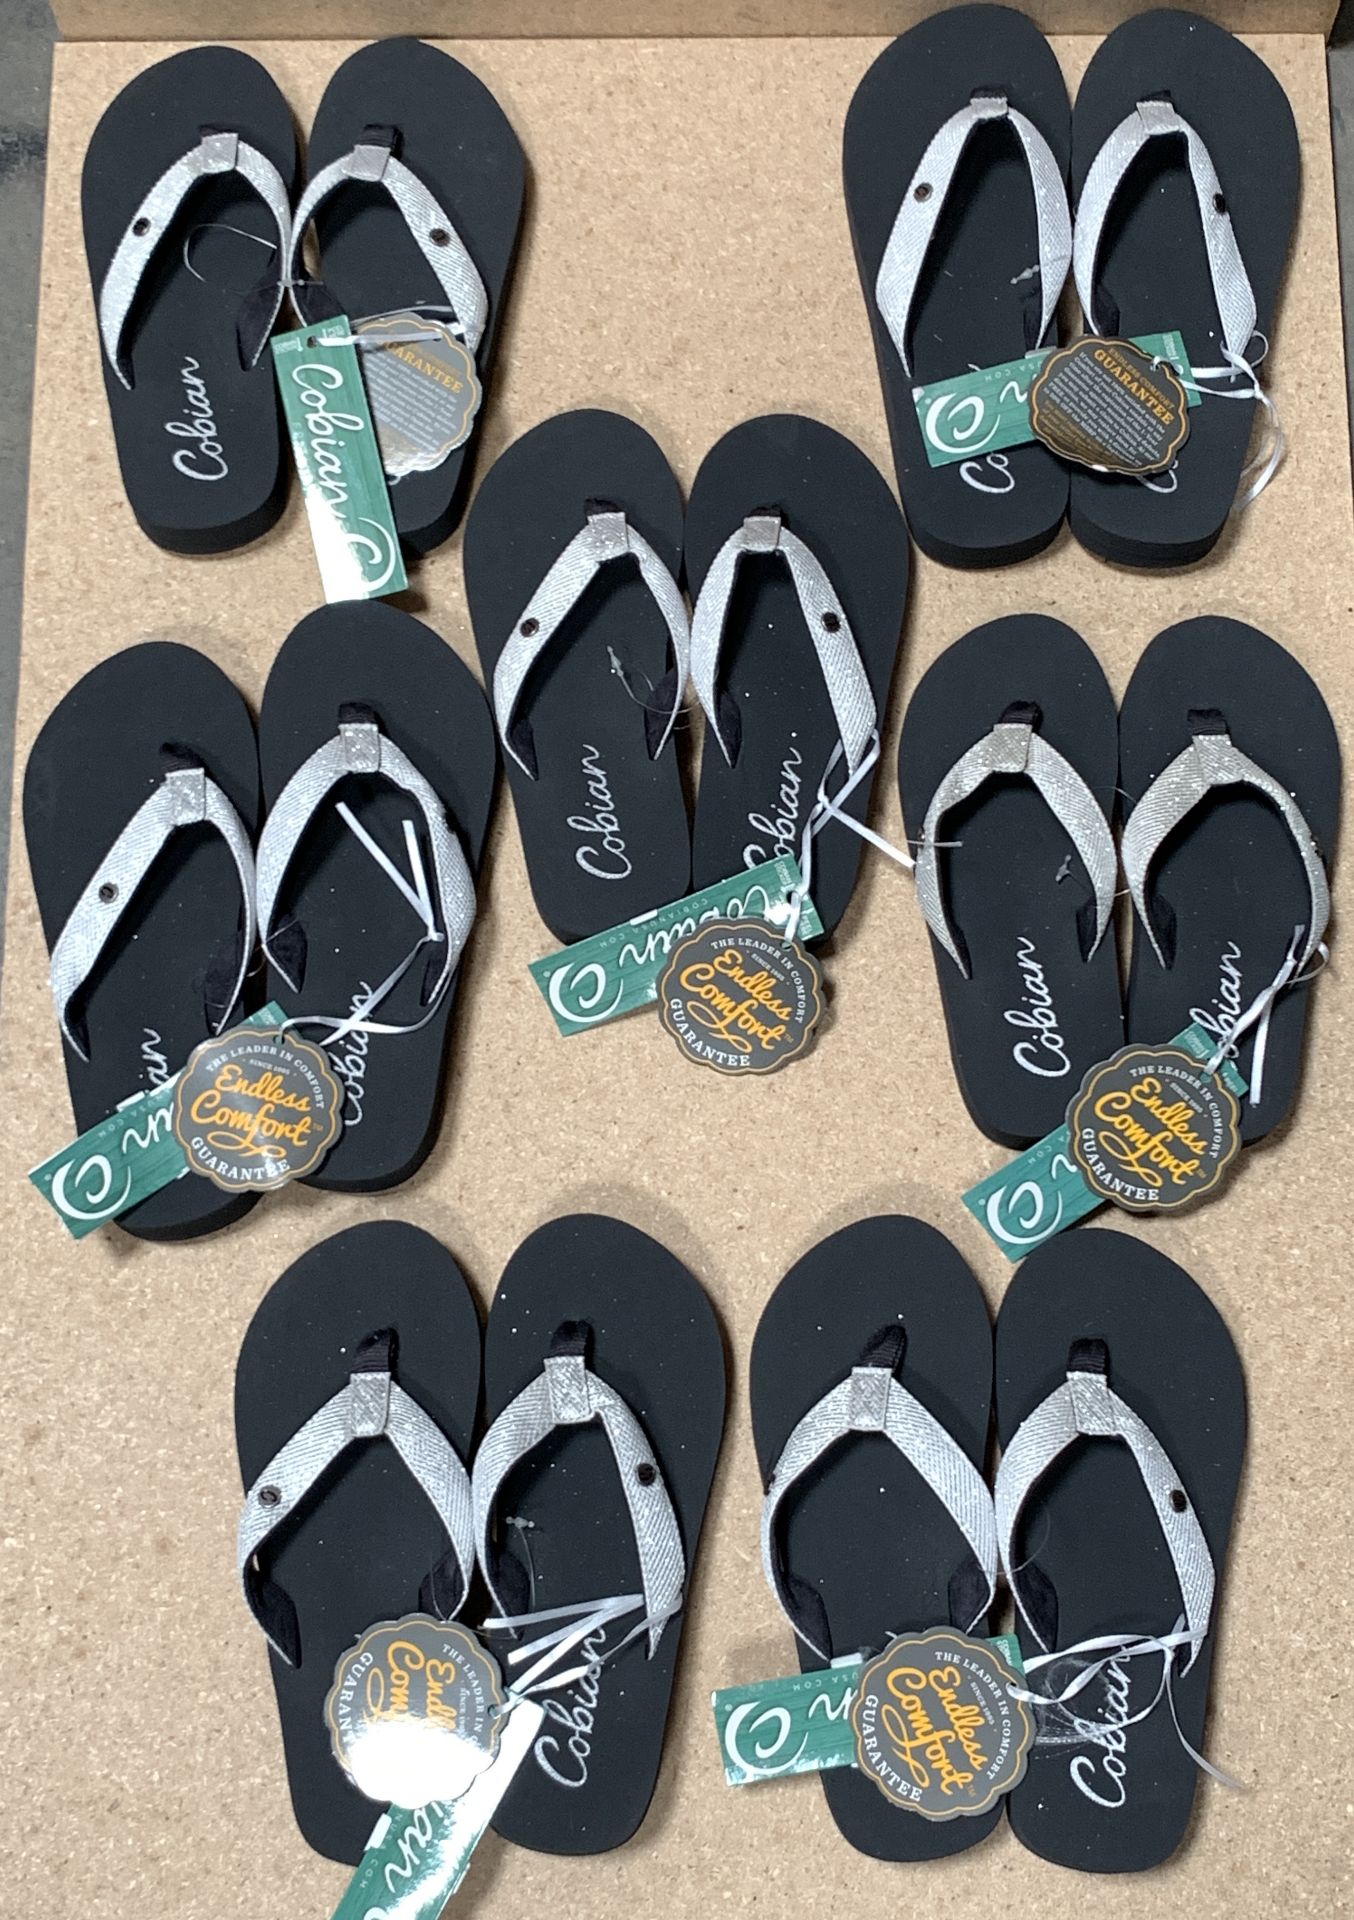 7 Pairs Cobian Flip Flop Sandals, Cancun Bounce, New w. Tags, Various Sizes (Retail $266)